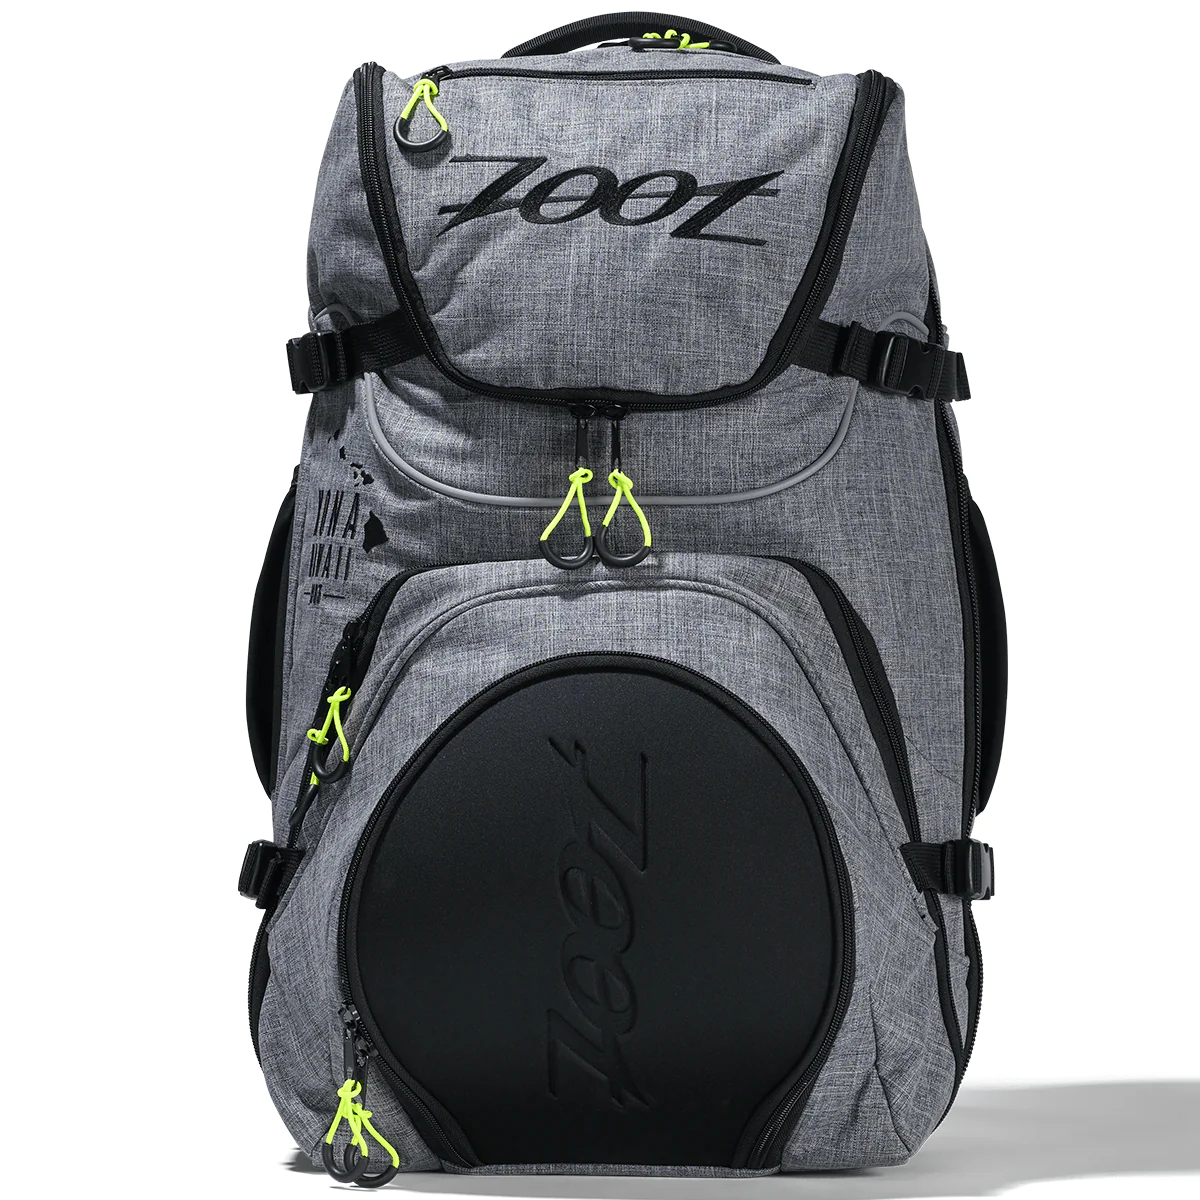 zoot-sports-bags-canvas-gray-new-ultra-tri-bag-canvas-gray-13651101122639_1200x1200